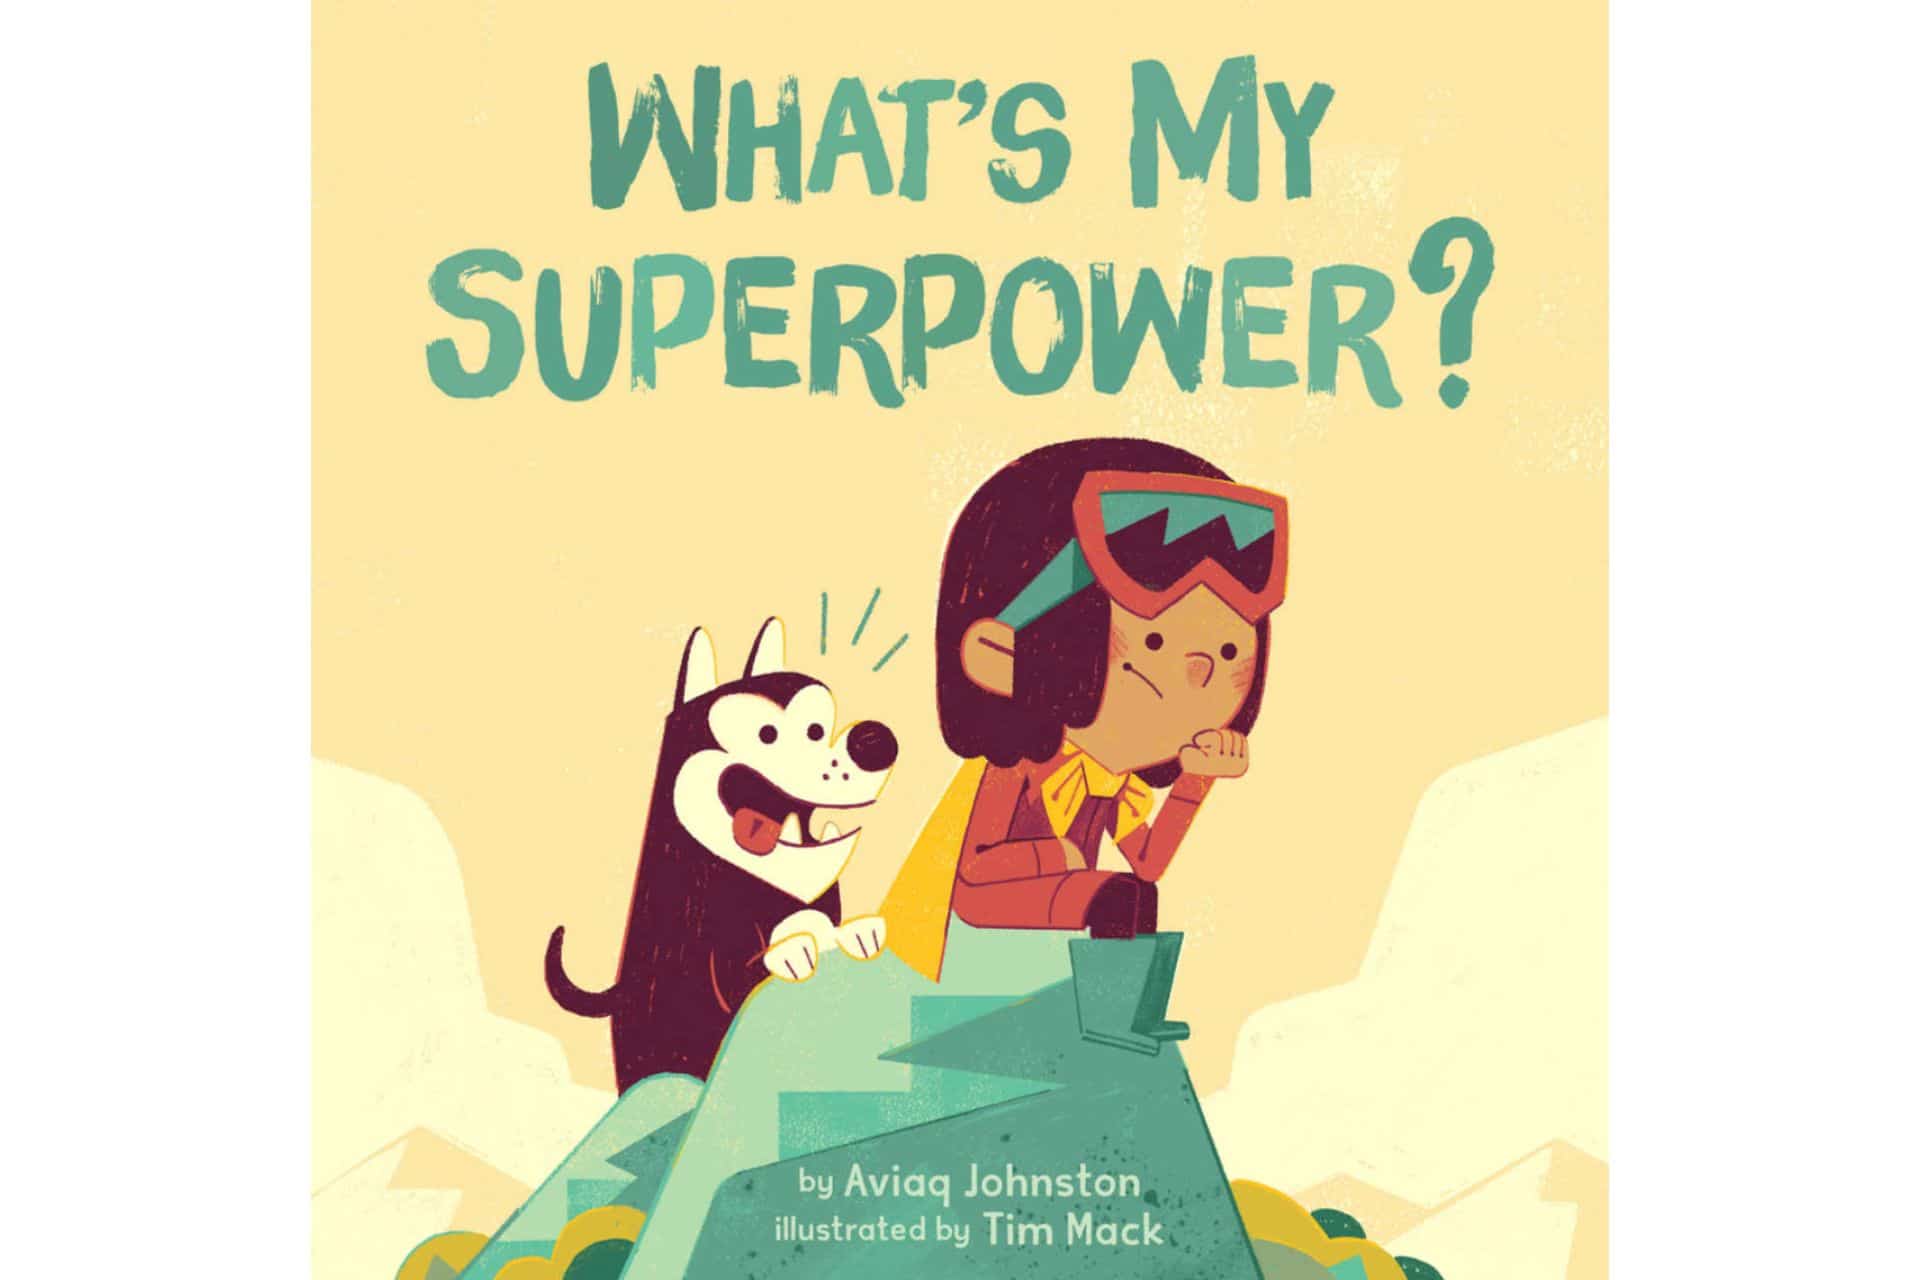 Indigenous superpower 1920x1280 1 - 10 amazing indigenous children's books to add to your child's library